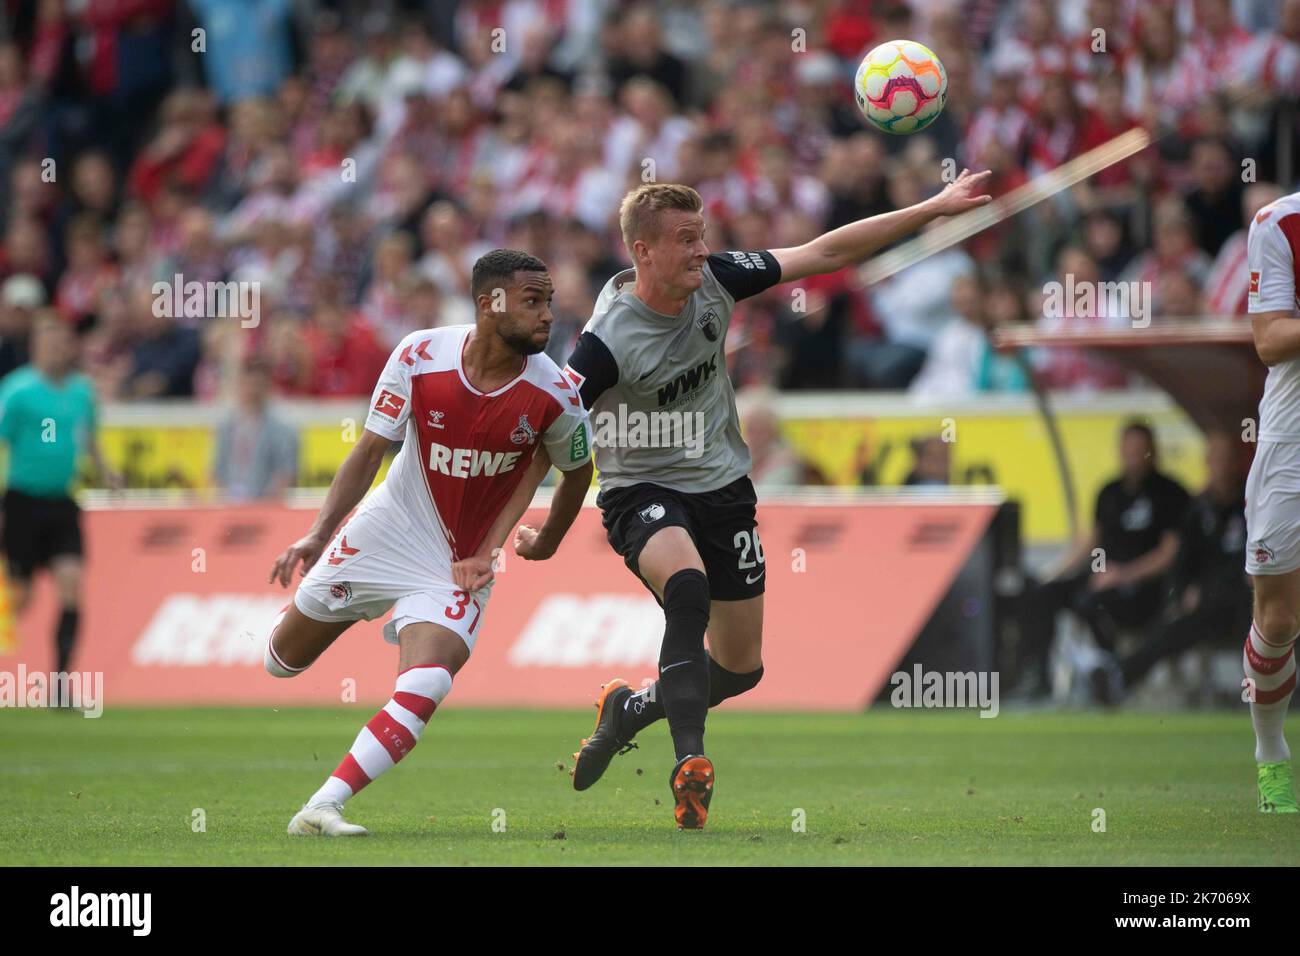 Linton MAINA (K) versus Frederik WINTHER (A), action, duels, soccer 1st Bundesliga, 10th matchday, FC Cologne (K) - FC Augsburg (A) 3: 2 on October 16th, 2022 in Koeln/ Germany. #DFL regulations prohibit any use of photographs as image sequences and/or quasi-video # © Stock Photo